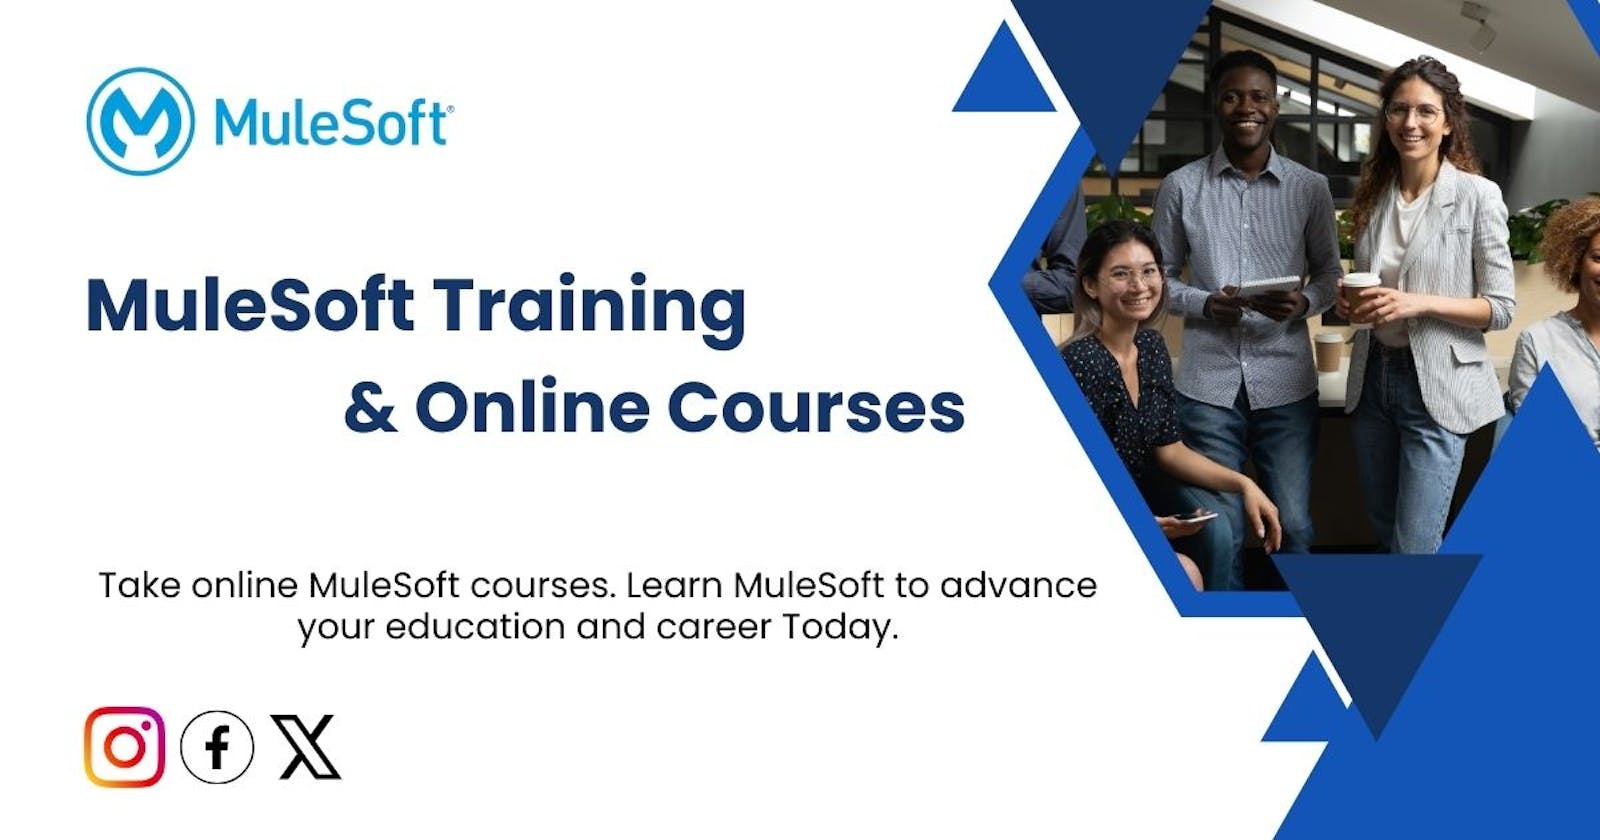 5 Best MuleSoft Training And Online Courses To Consider